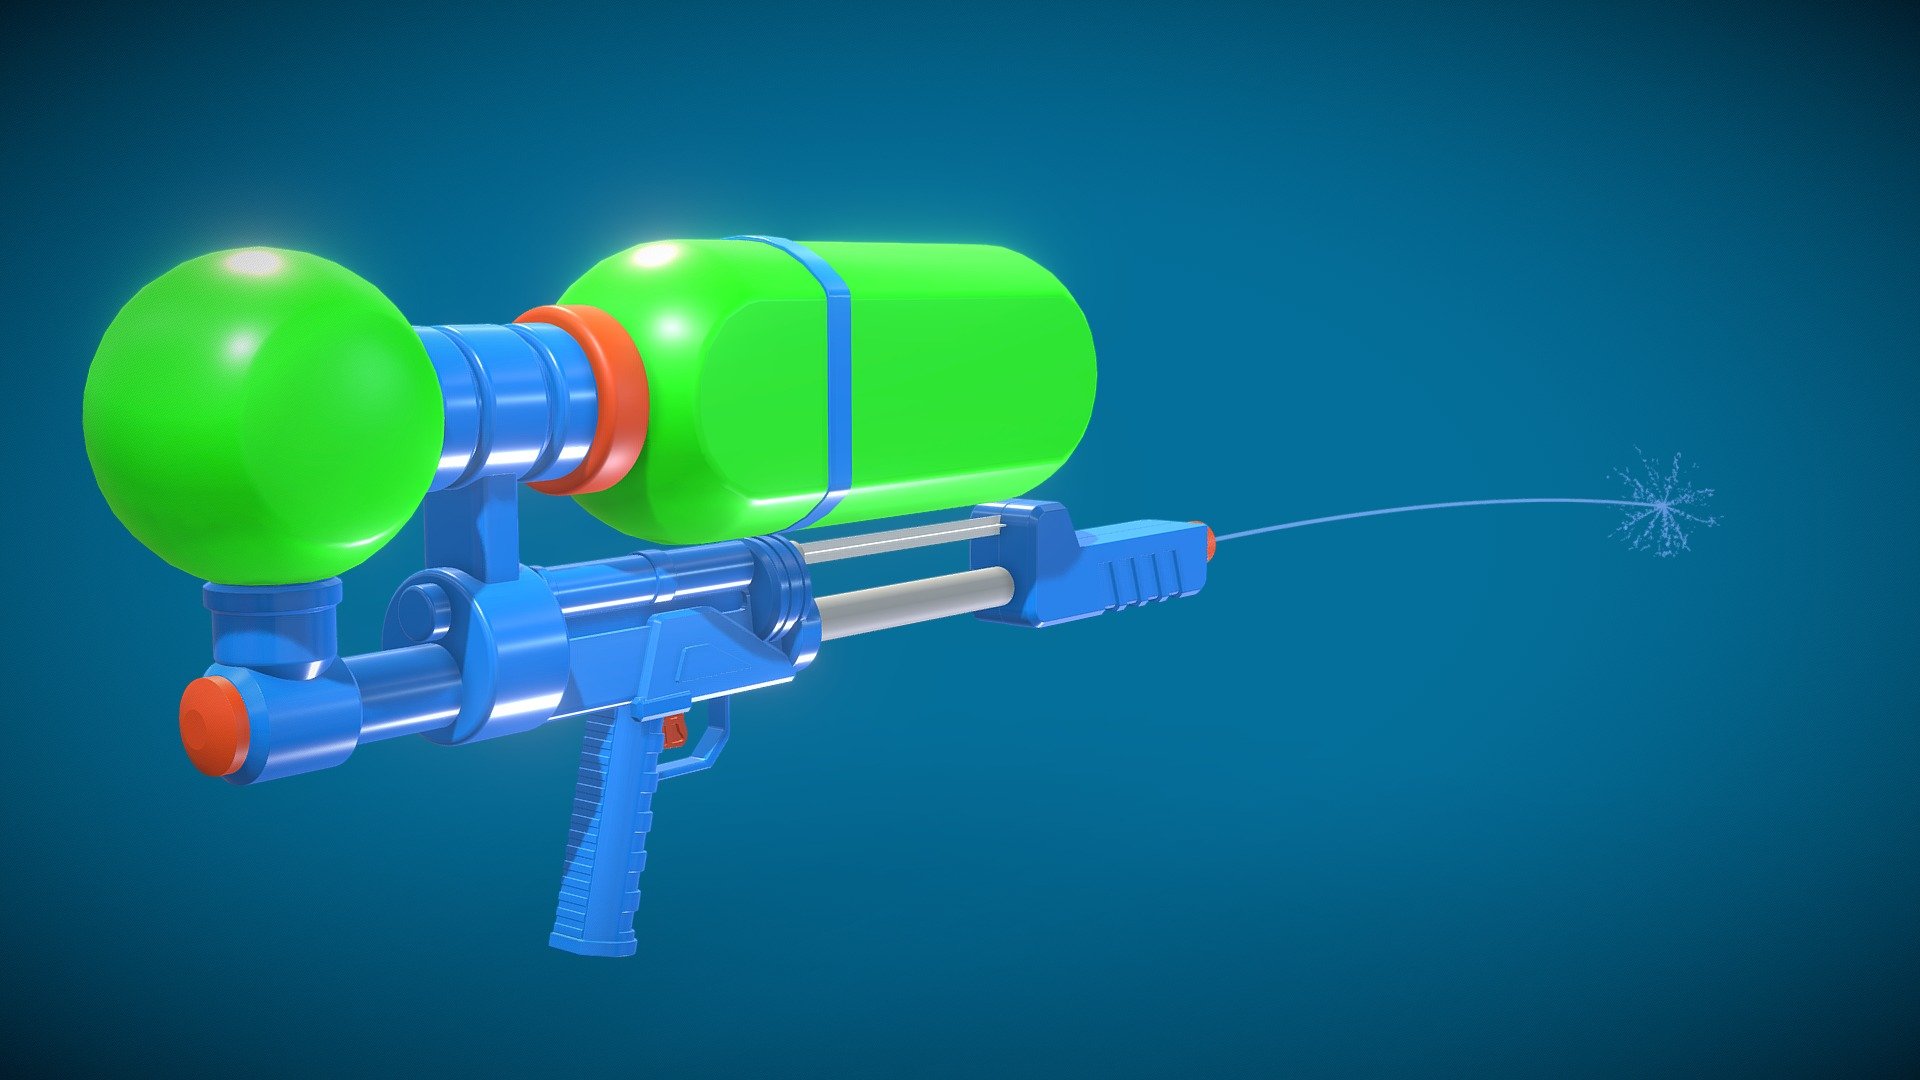 A kids toy water, Modeled in blender as a high poylmodel with a waterblast 3d model